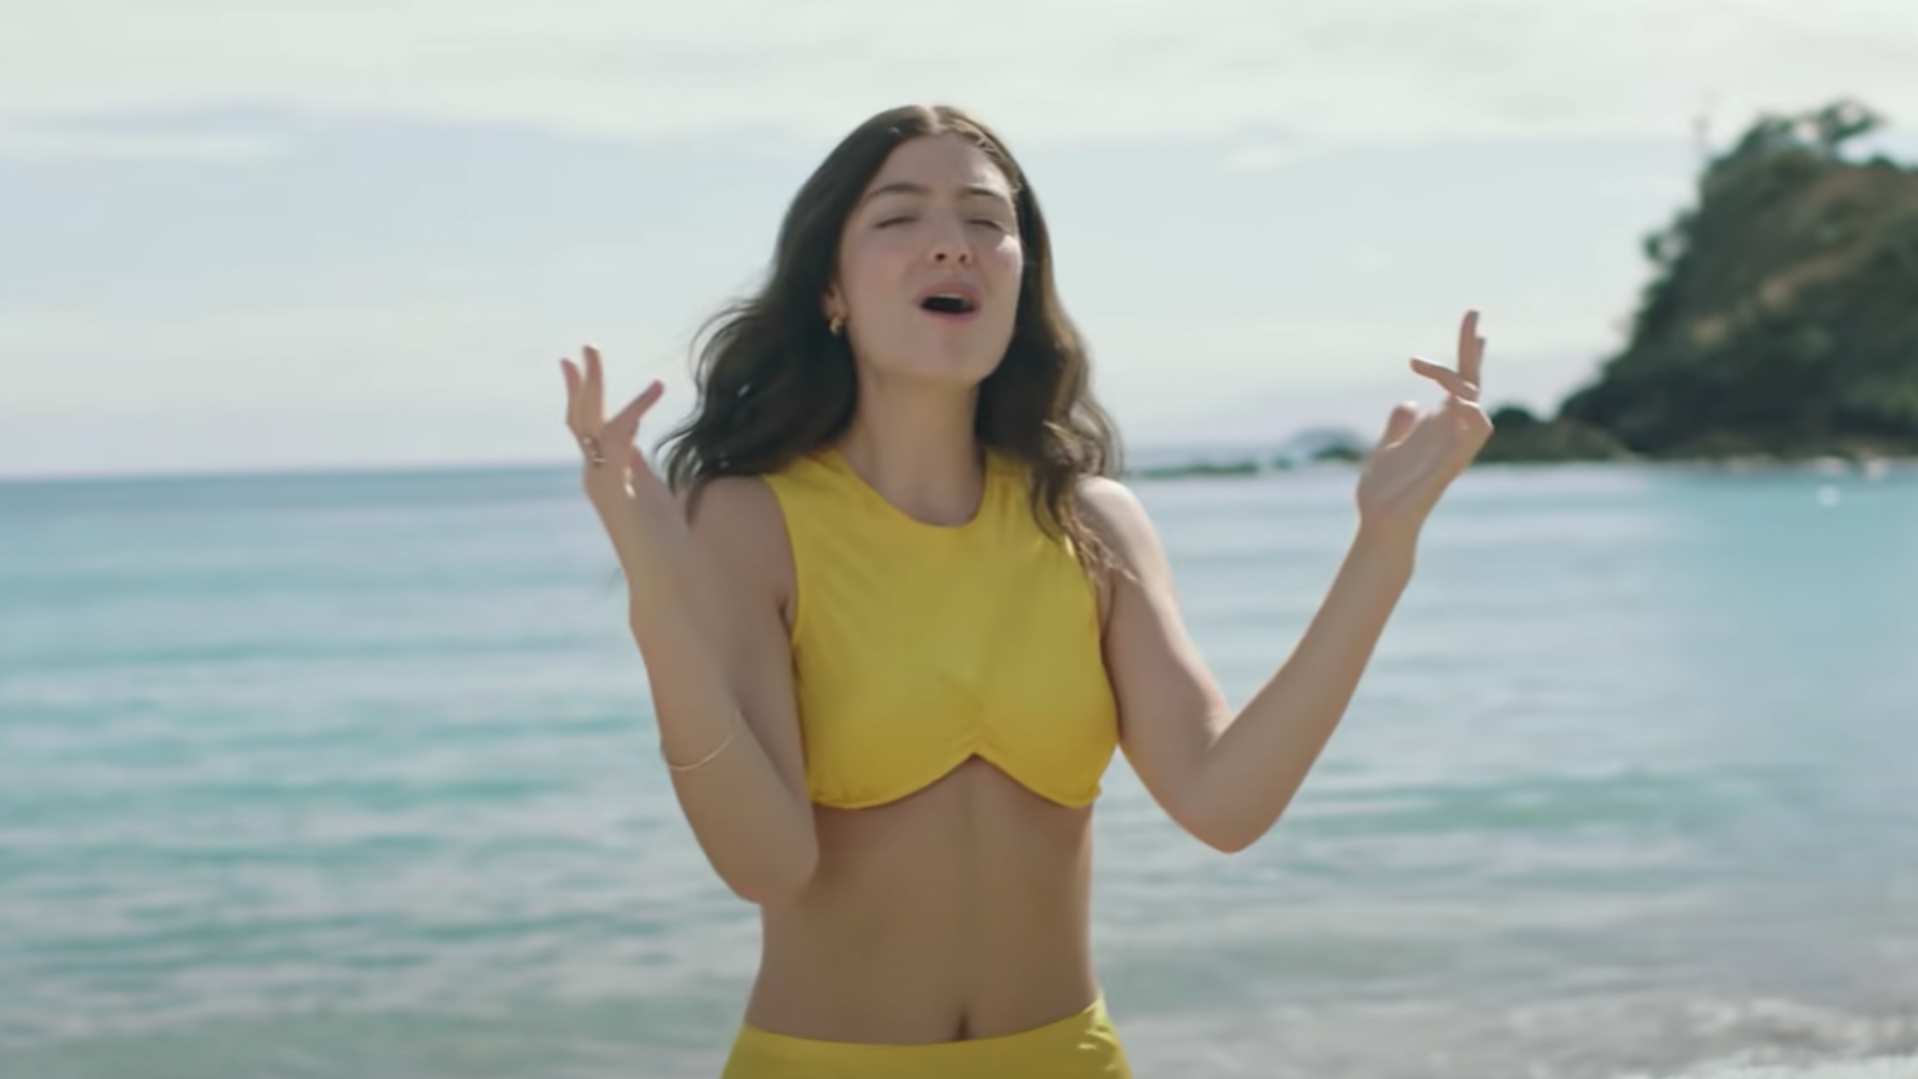 Lorde has risen: Solar Power comes out on August 20